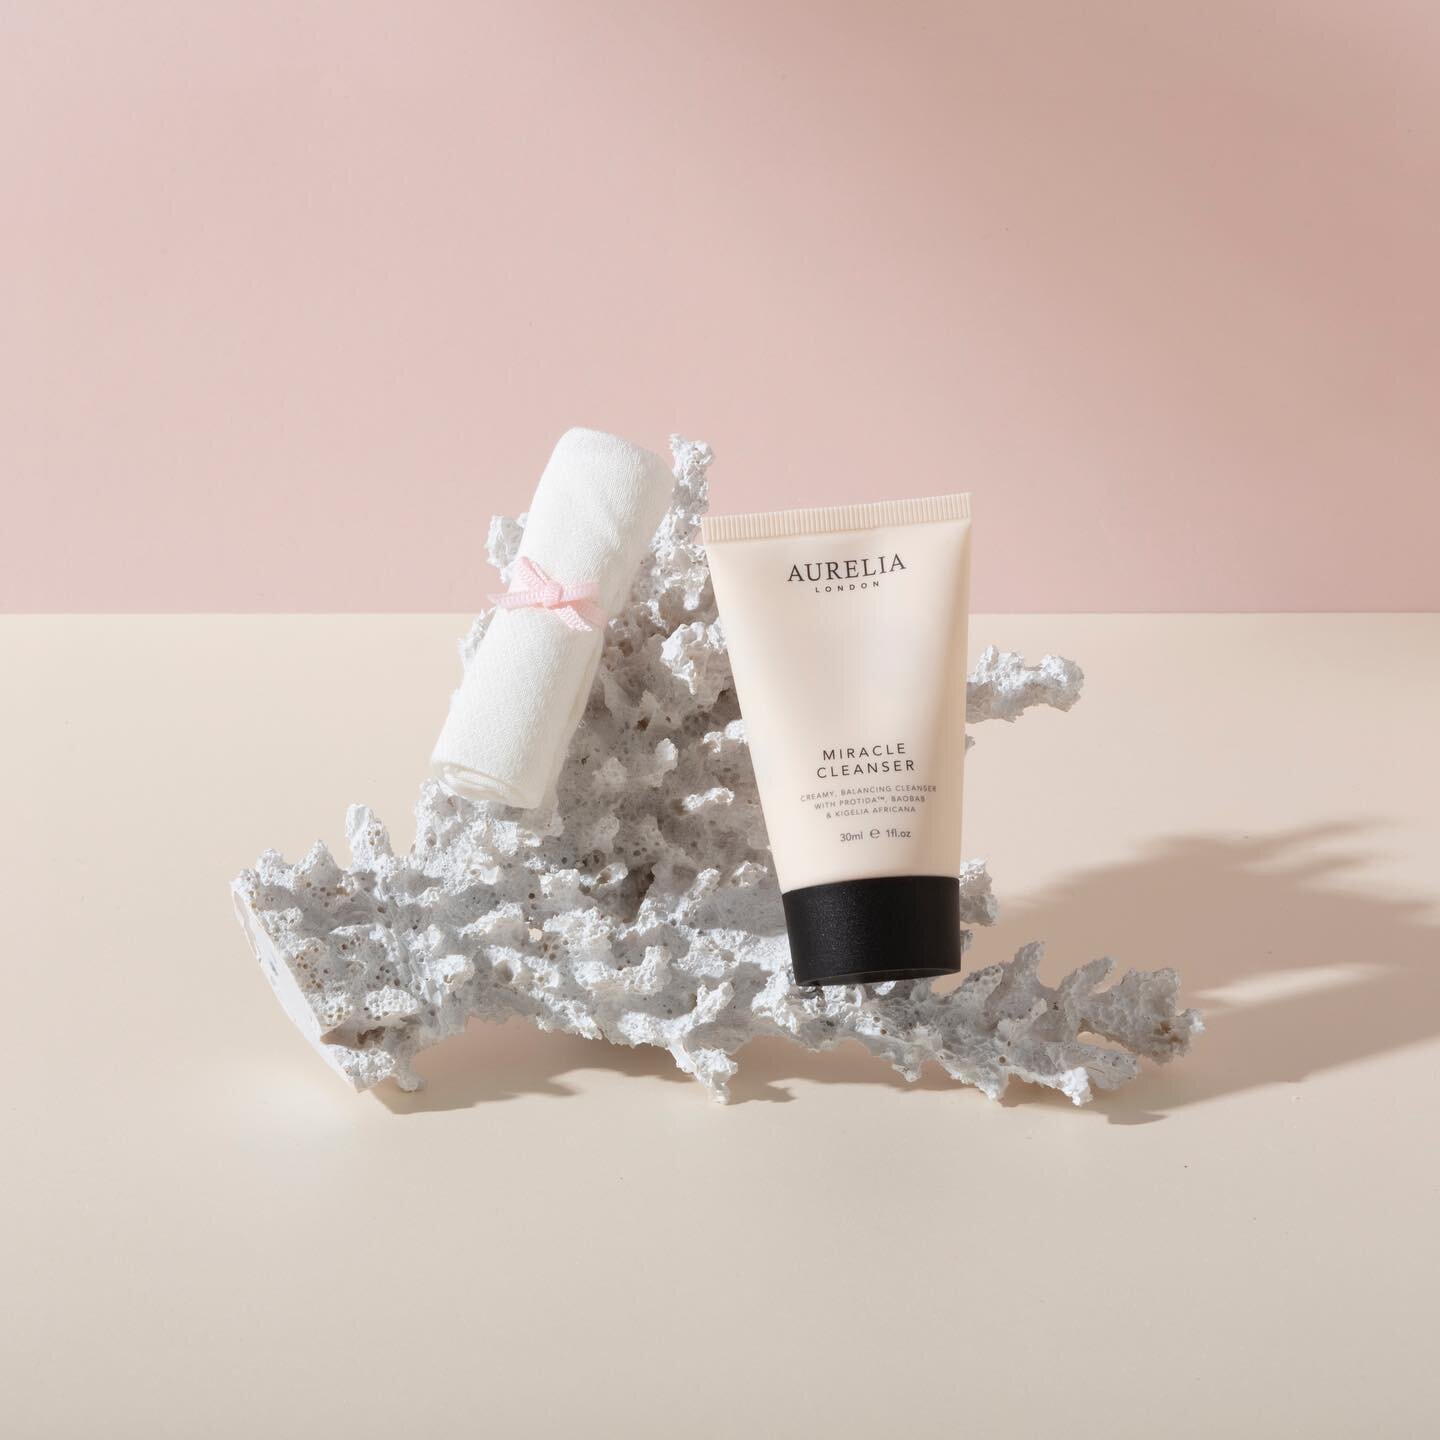 Have you tried the Aurelia Miracle Cleanser? ✨

This award winning cleanser is perfect for skin that needs hydration and nourishment. This creamy aromatic cleanser has a rich formula that gently lifts off all impurities and makeup to leave skin brigh